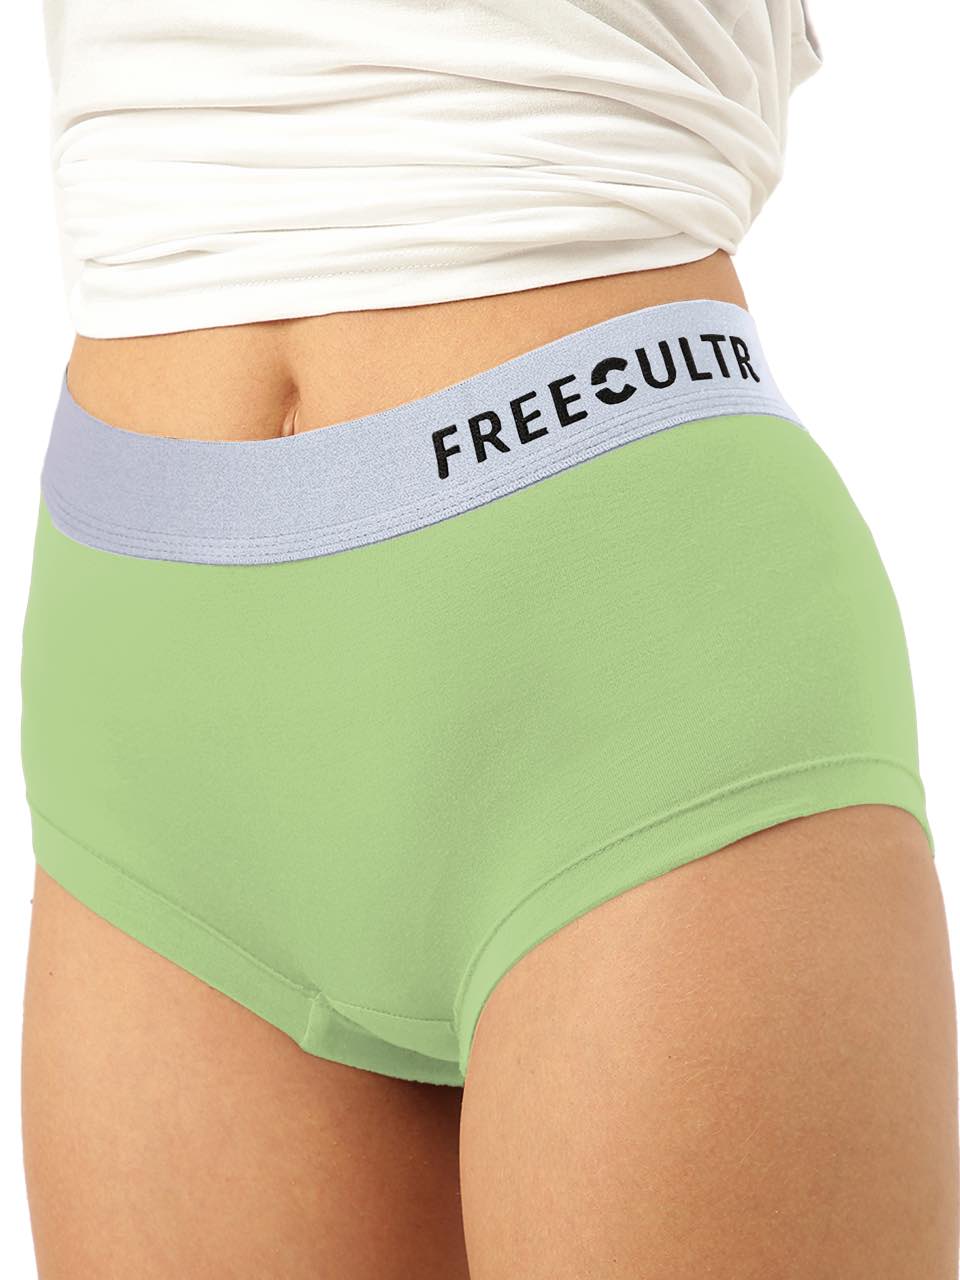 Women's Anti-Bacterial Micro Modal Boxer Brief with Silverfox Waistband (Pack of 1)